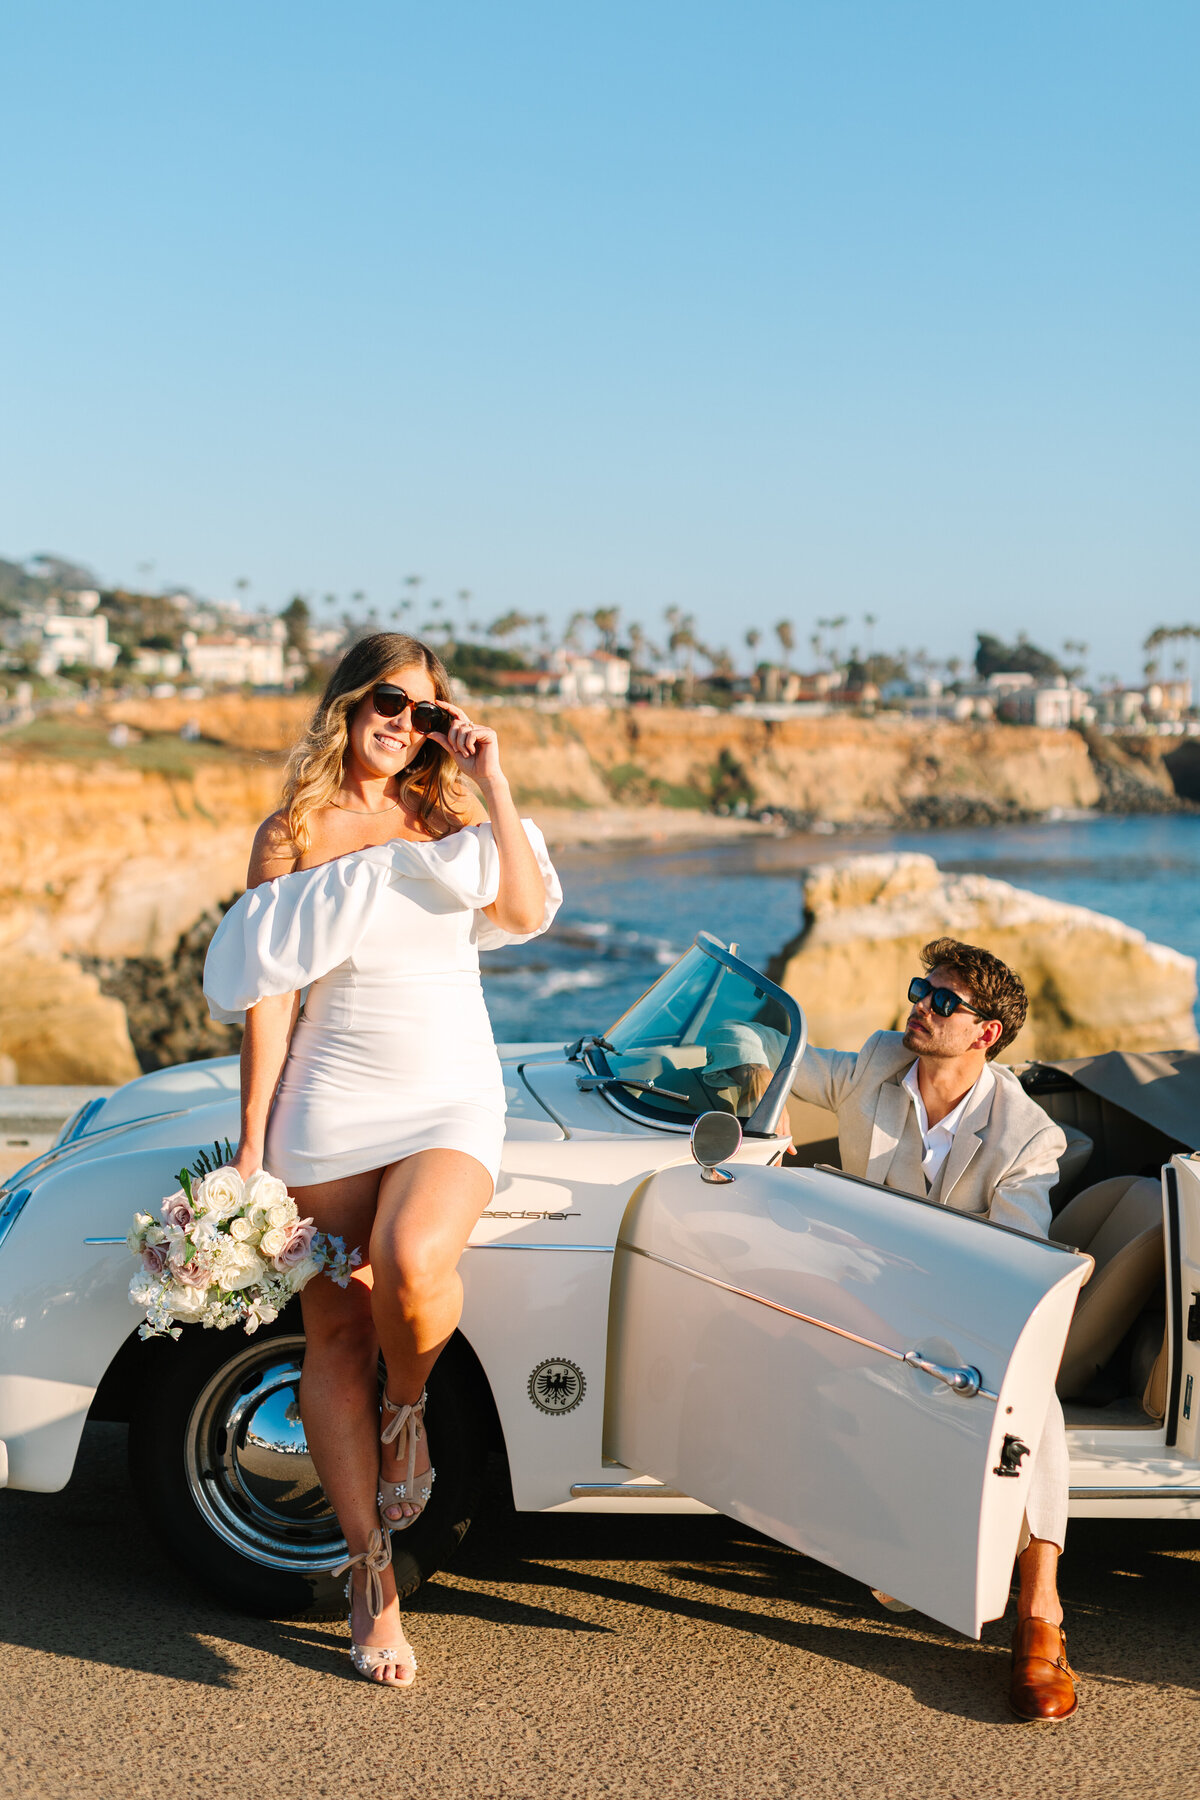 bride leaning against a vintage car while groom sits in driver's seat in front of a beach.